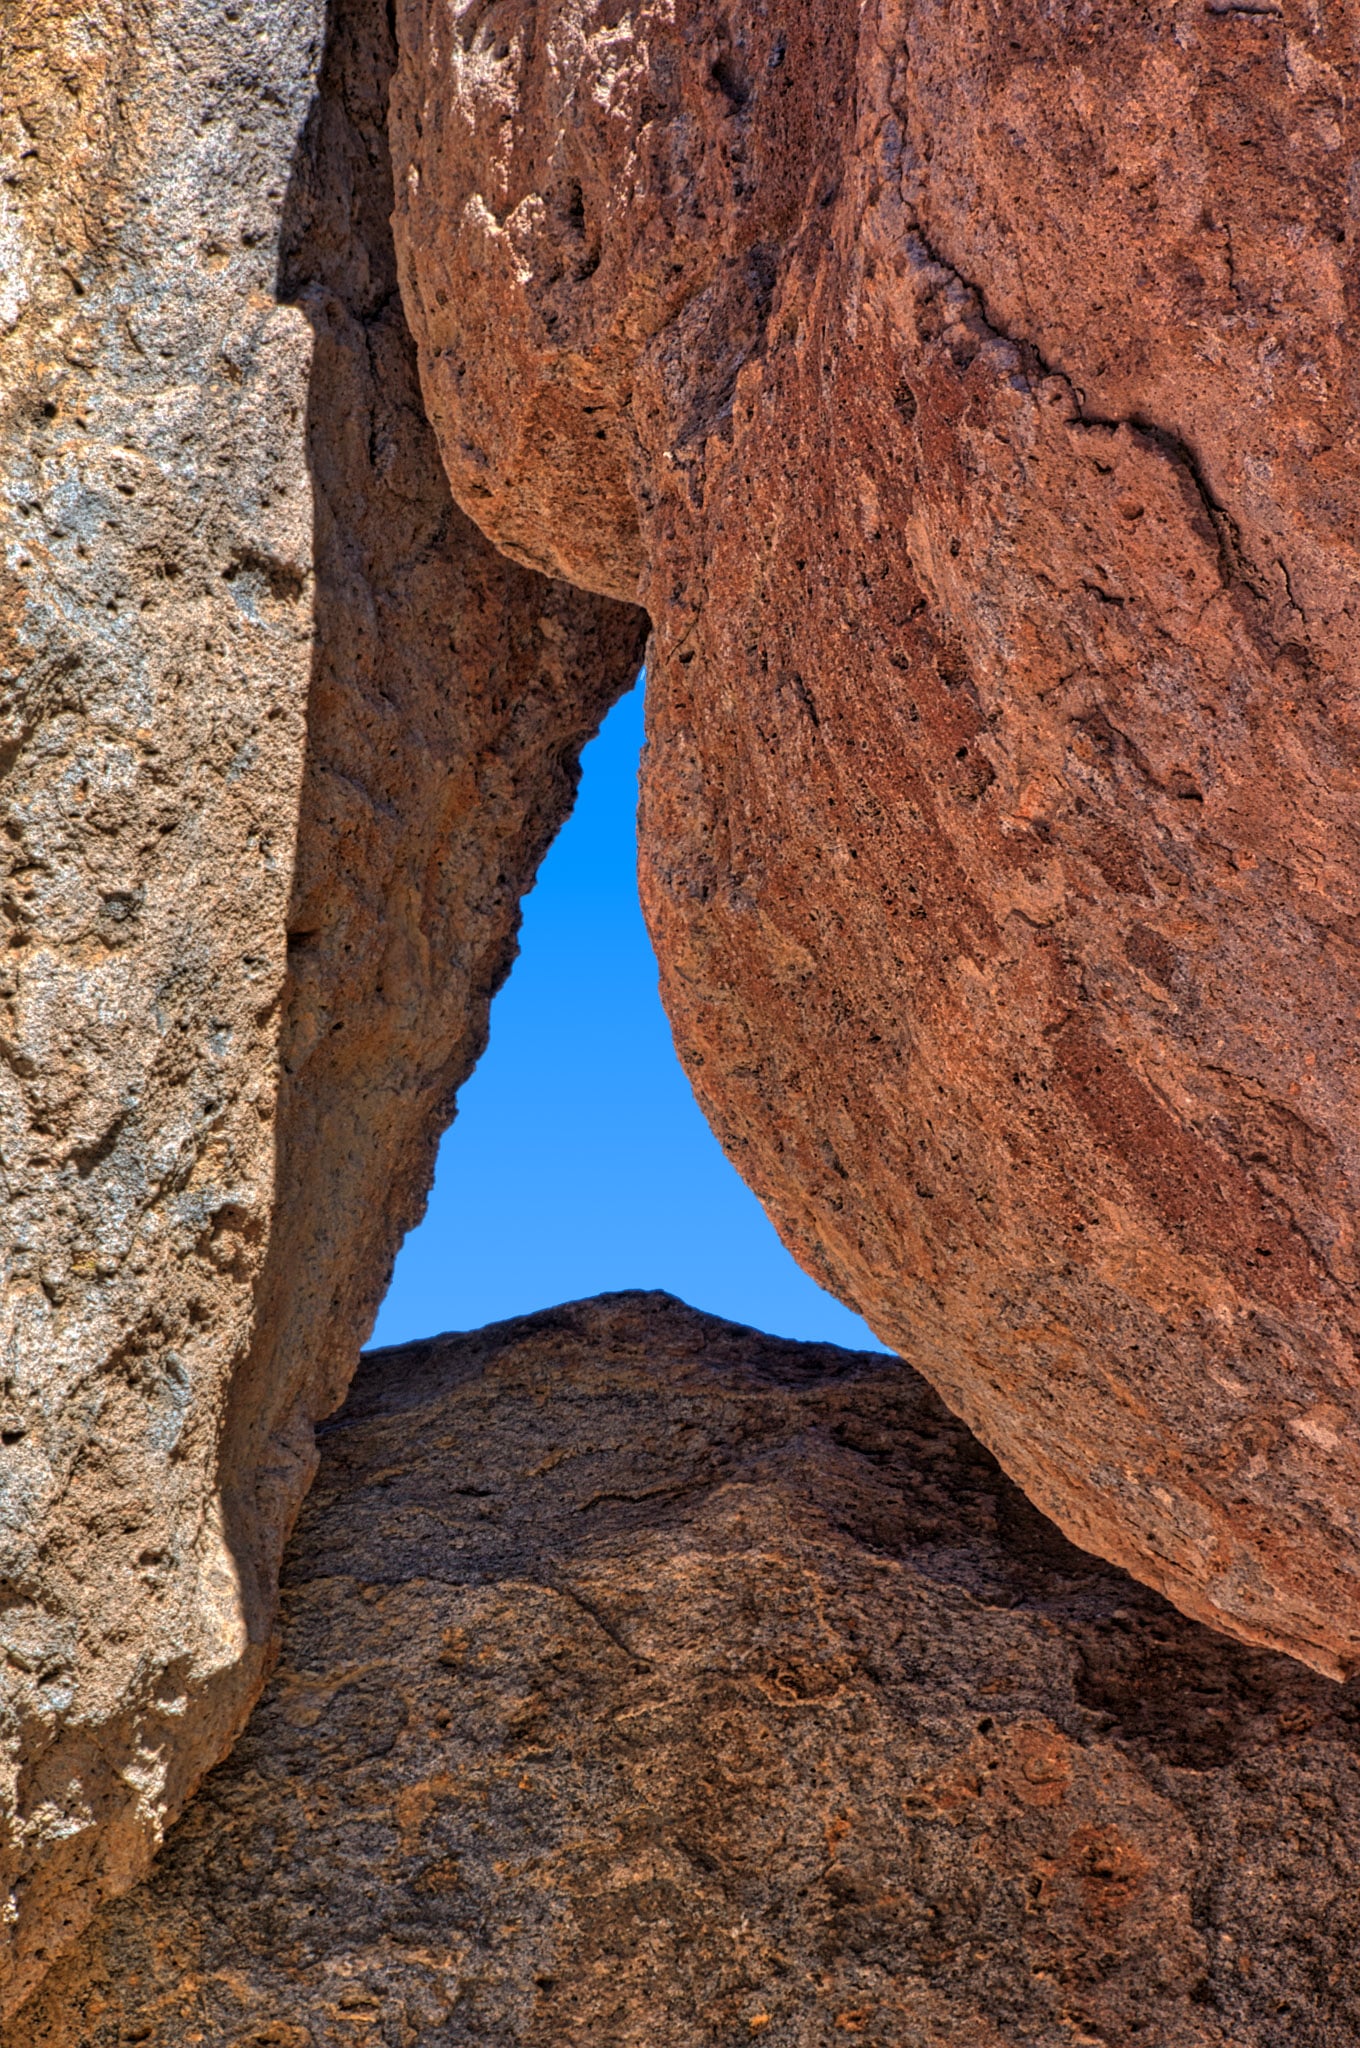 A view up through converging pinnacles in City of Rocks State Park, near Silver City, New Mexico.